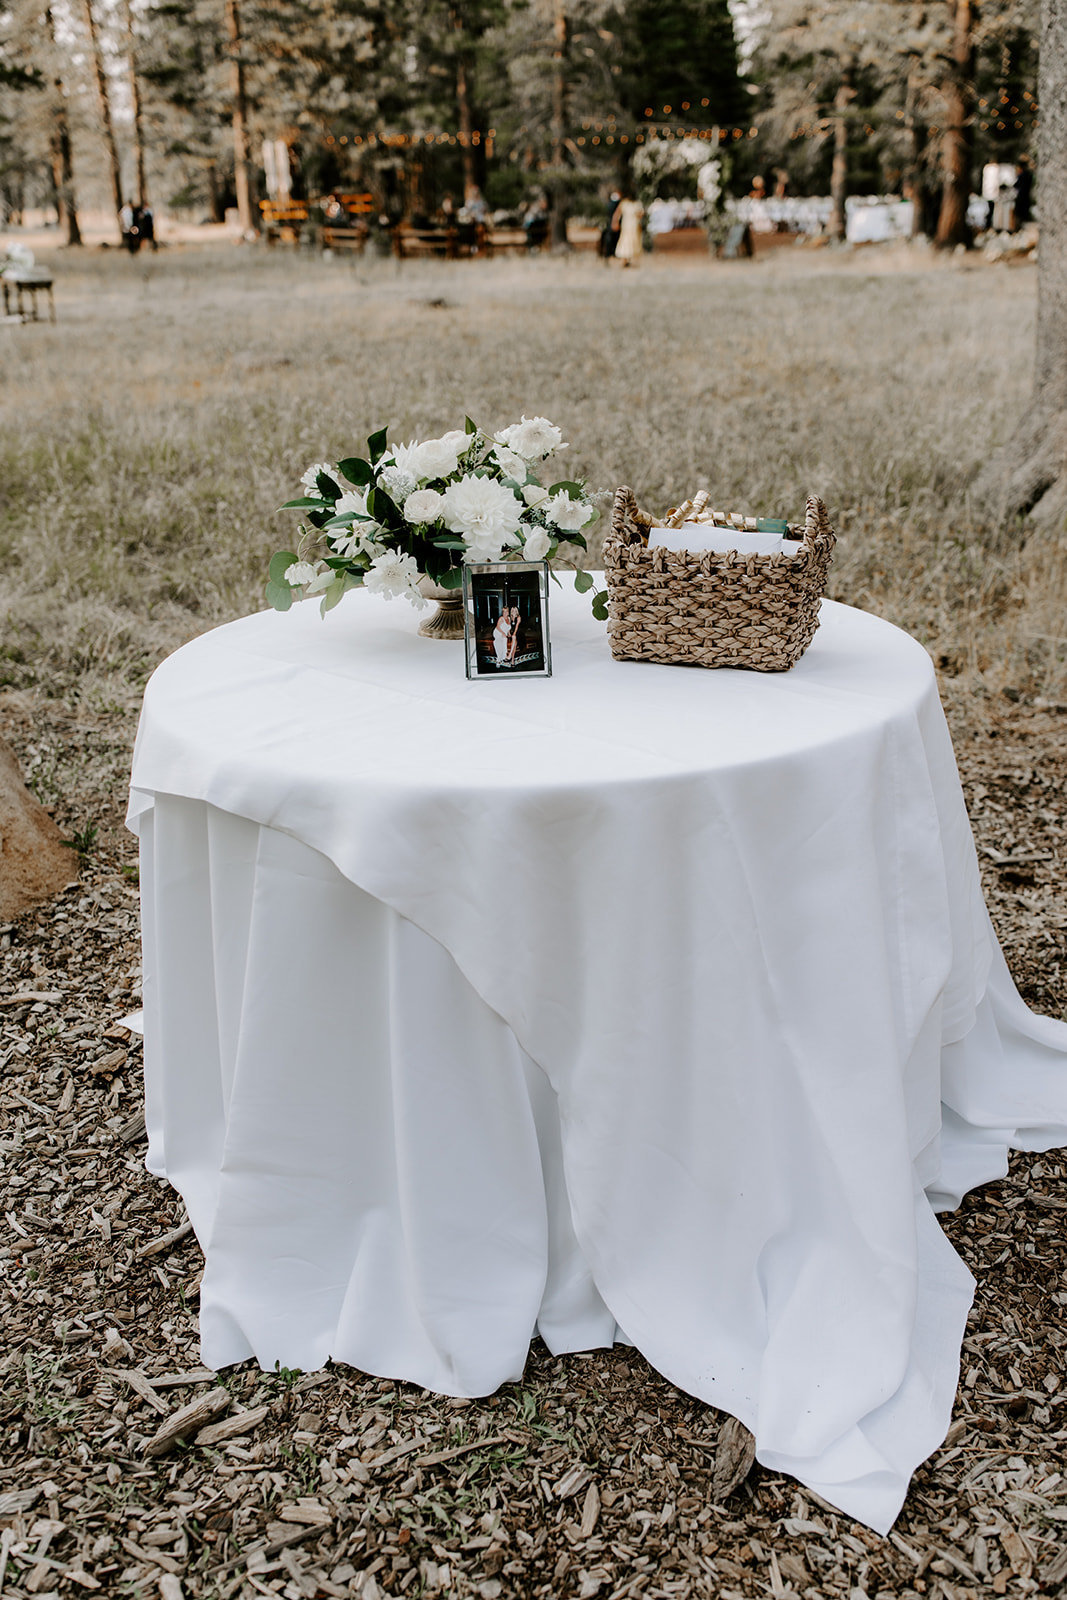 Truckee Wedding Planners couples round welcome table with white linen and simple floral at venue Mitchell's Mountain Meadows Sierraville, Joy of Life Events image by The Shepards Photography